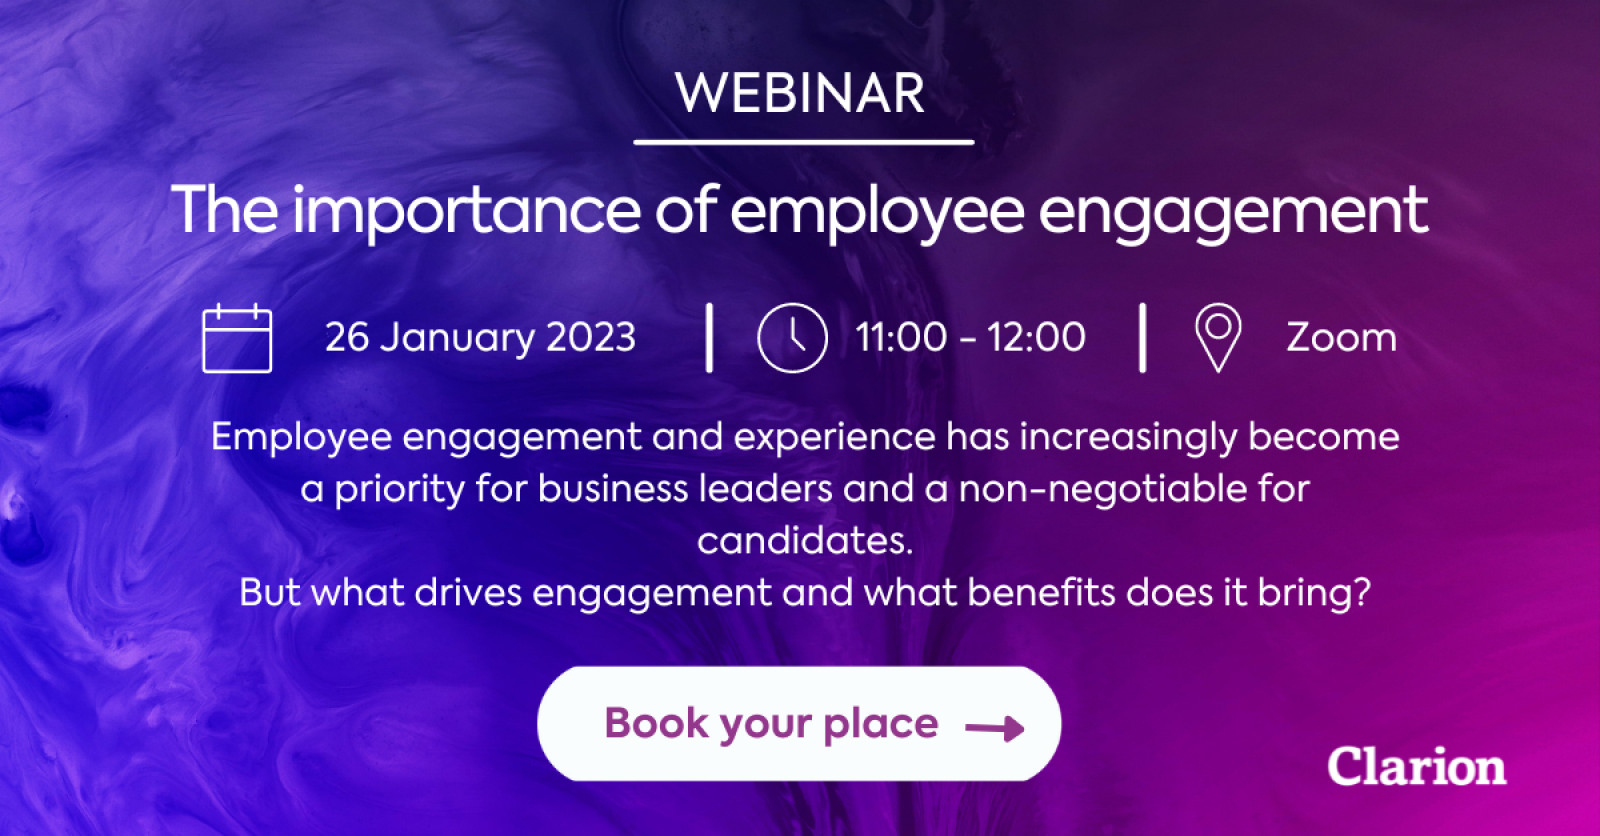 Webinar: The importance of employee engagement